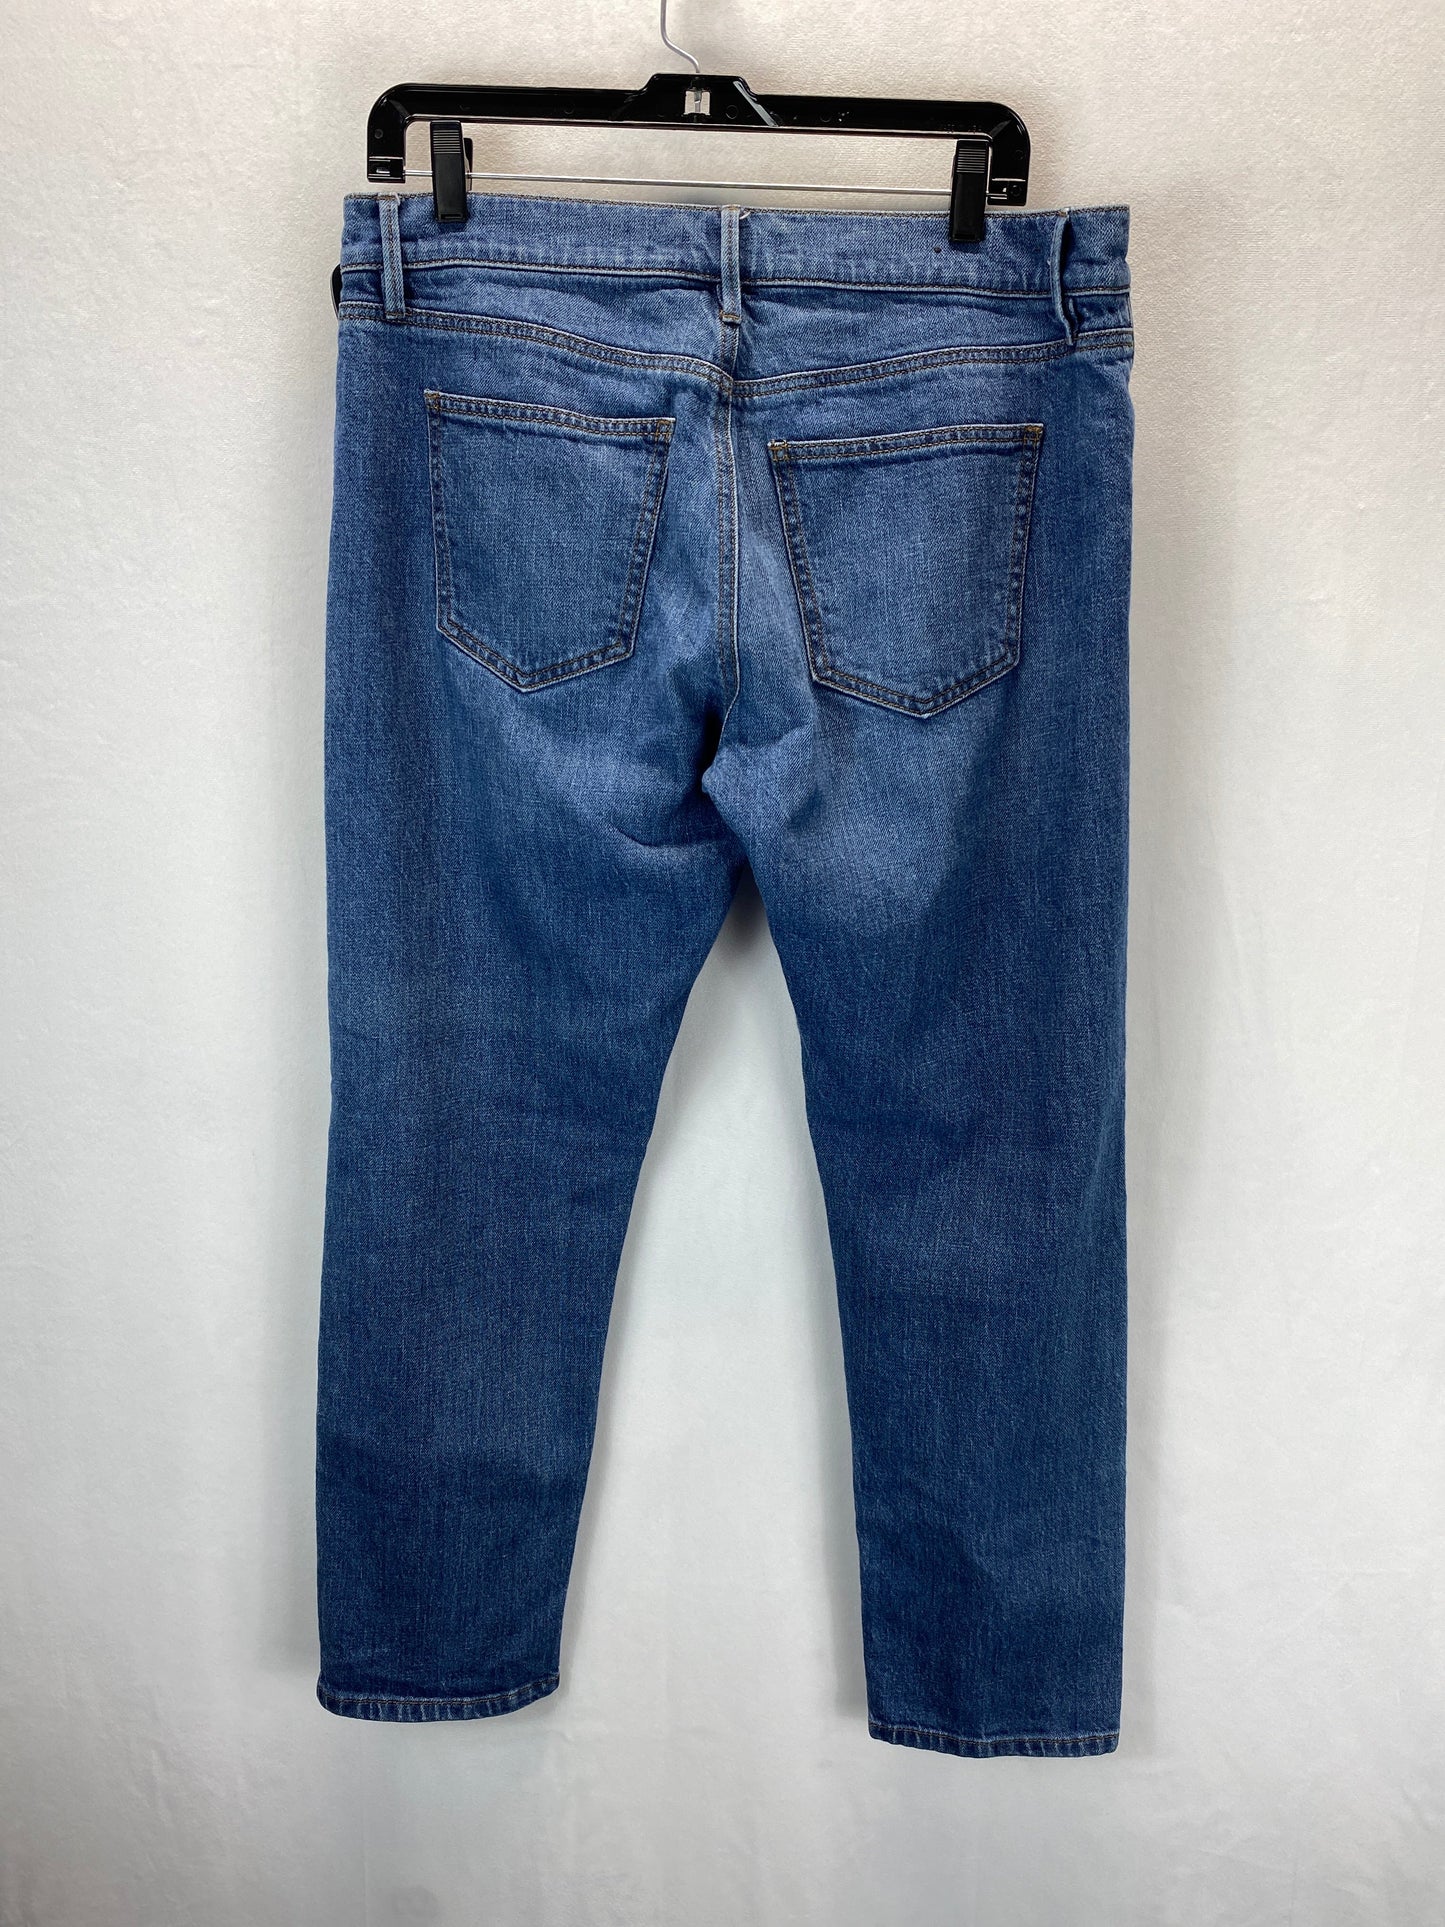 Jeans Relaxed/boyfriend By Ann Taylor  Size: 8